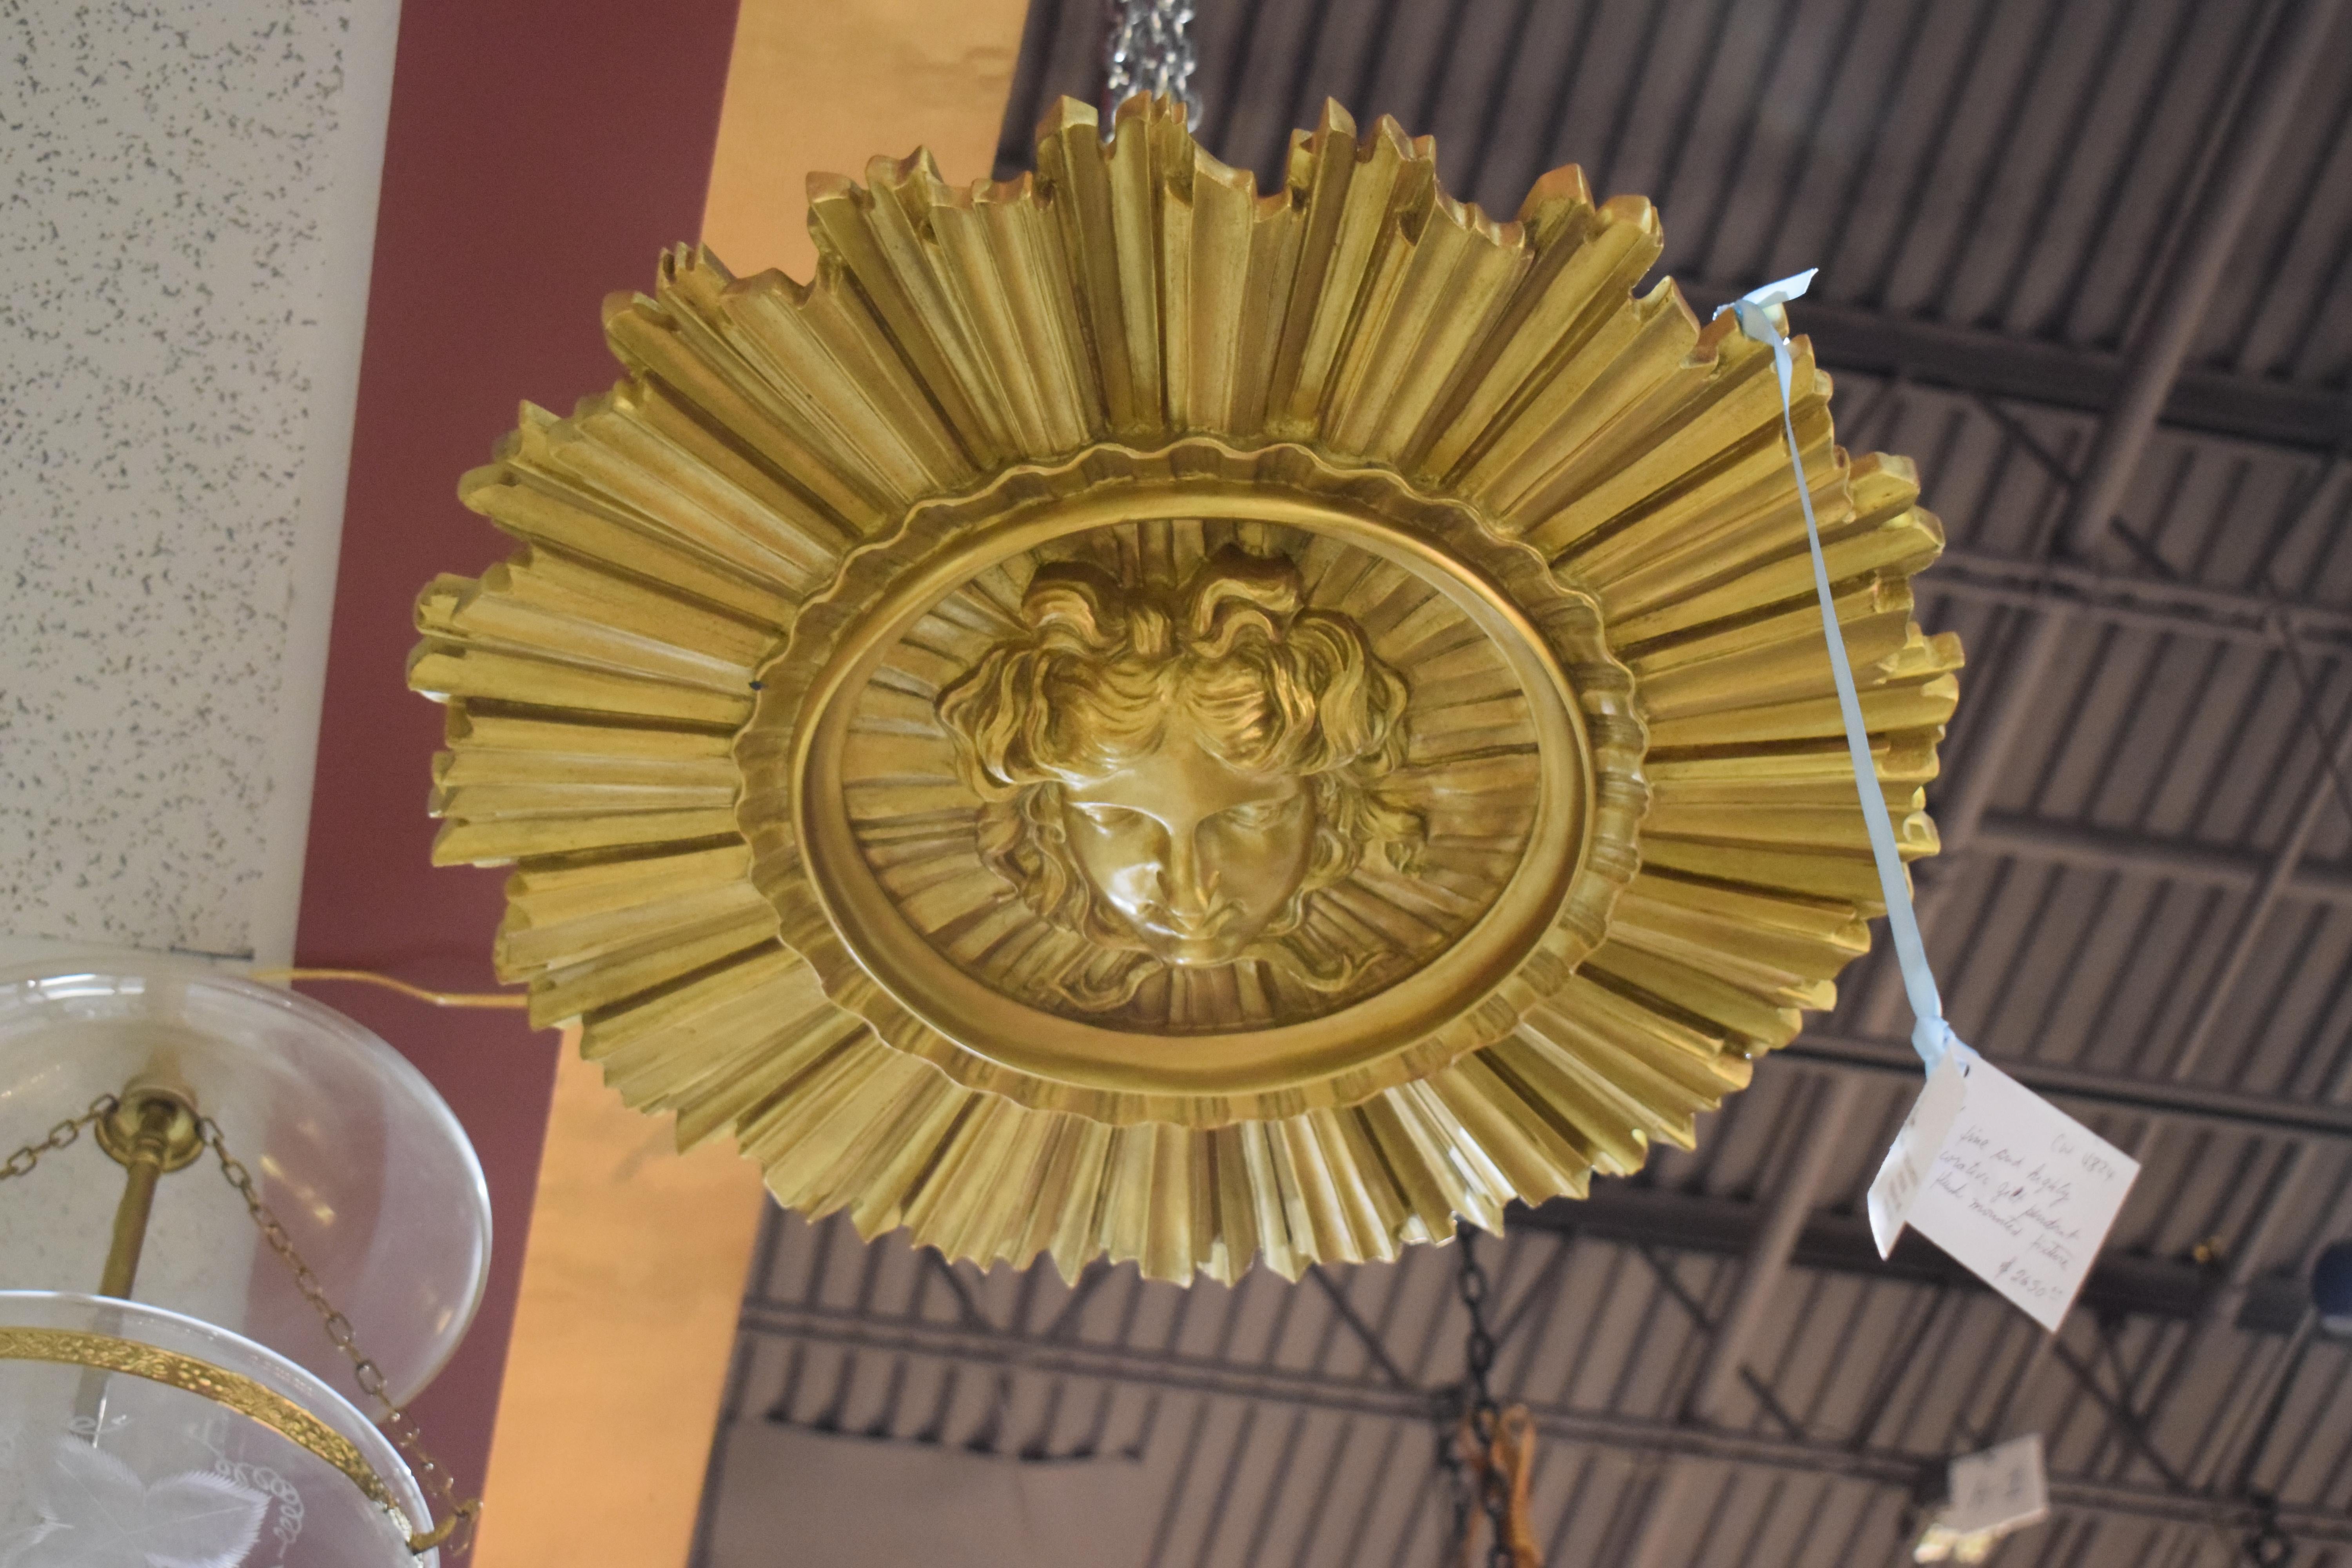 A very fine and highly decorative gilt pendant or flush mounted fixture representing Apollo and Sunburst. Five lights
Dimensions: Height 7